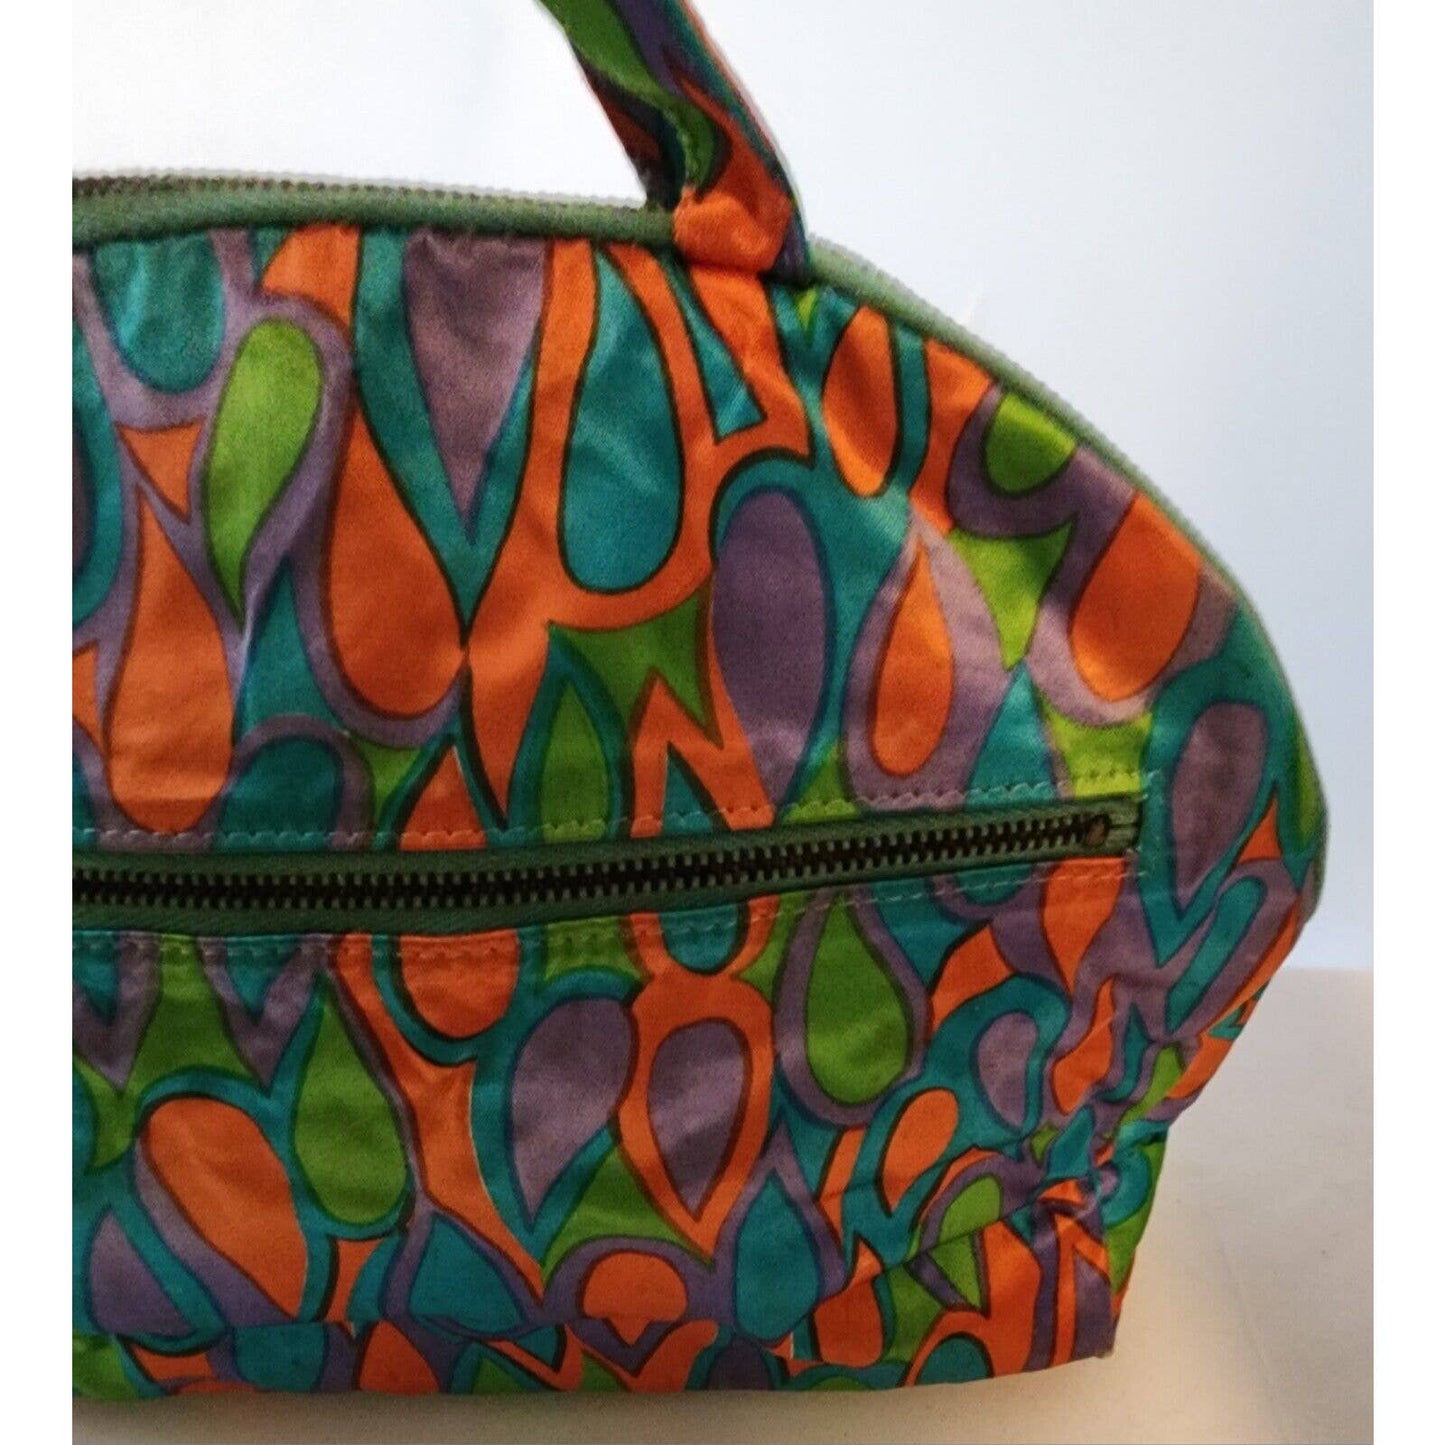 Vintage 60s Bright Psychedelic Print Satin Cosmetic Bag Celebrity Bags Mod